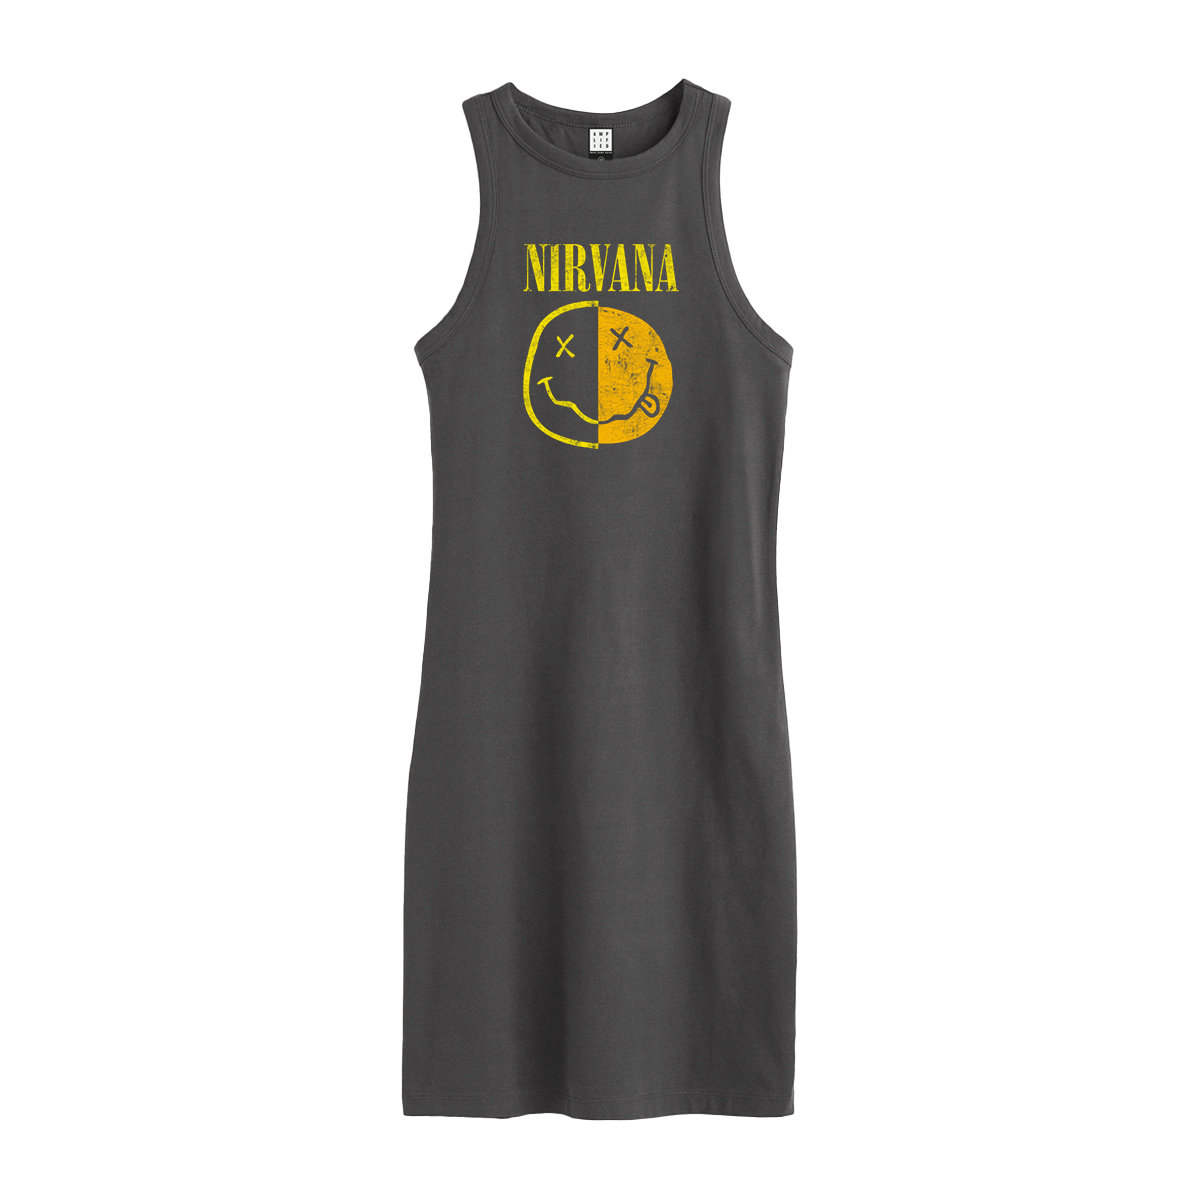 Nirvana - Spliced Smiley Fitted Dress